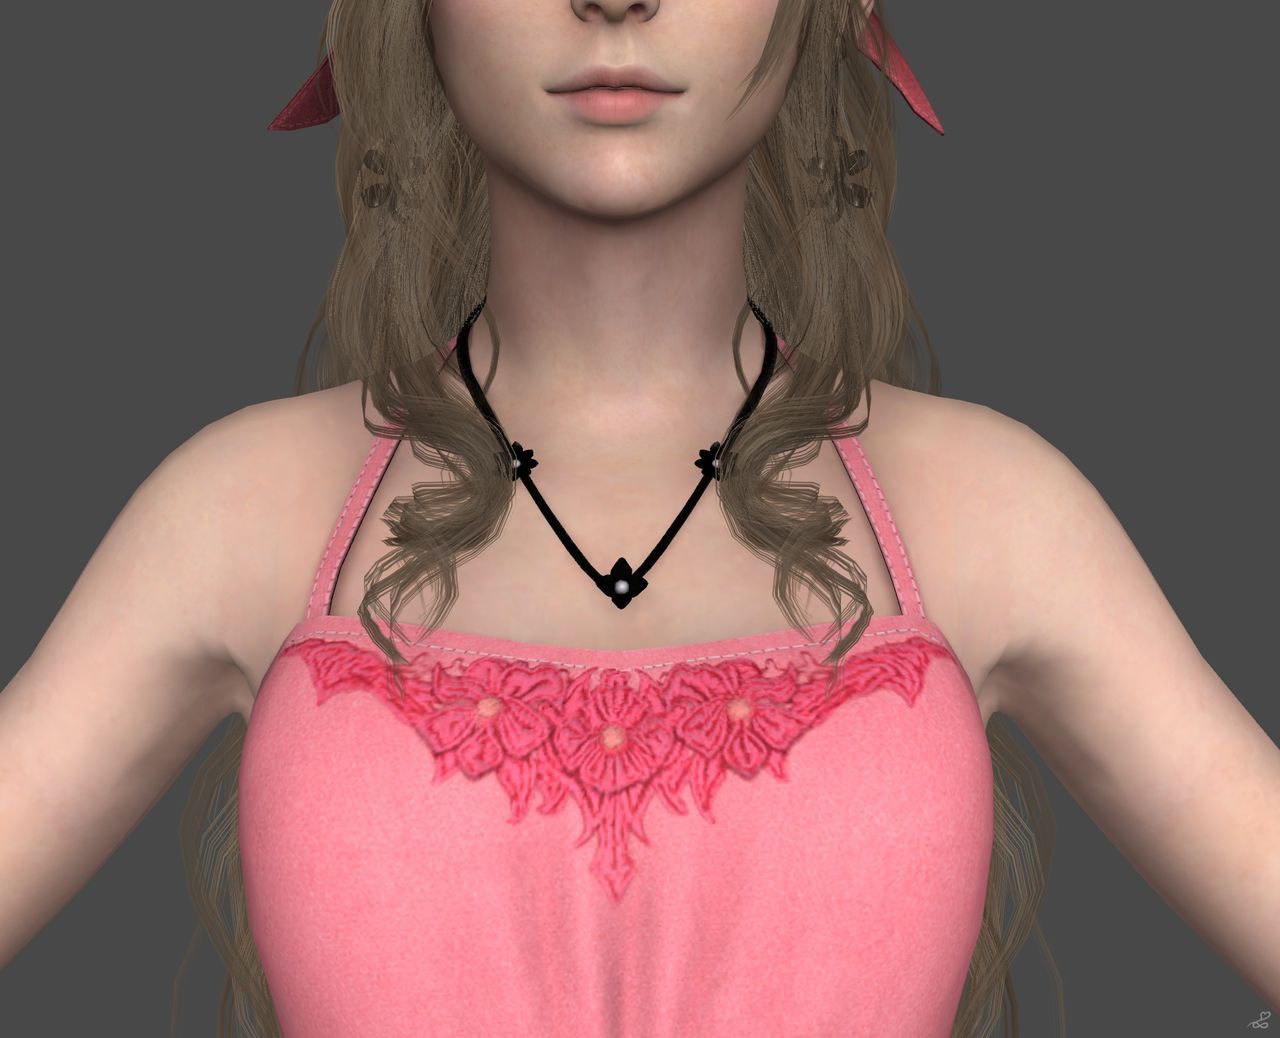 [J.A.] FF7 Remake | Aerith Reference 6